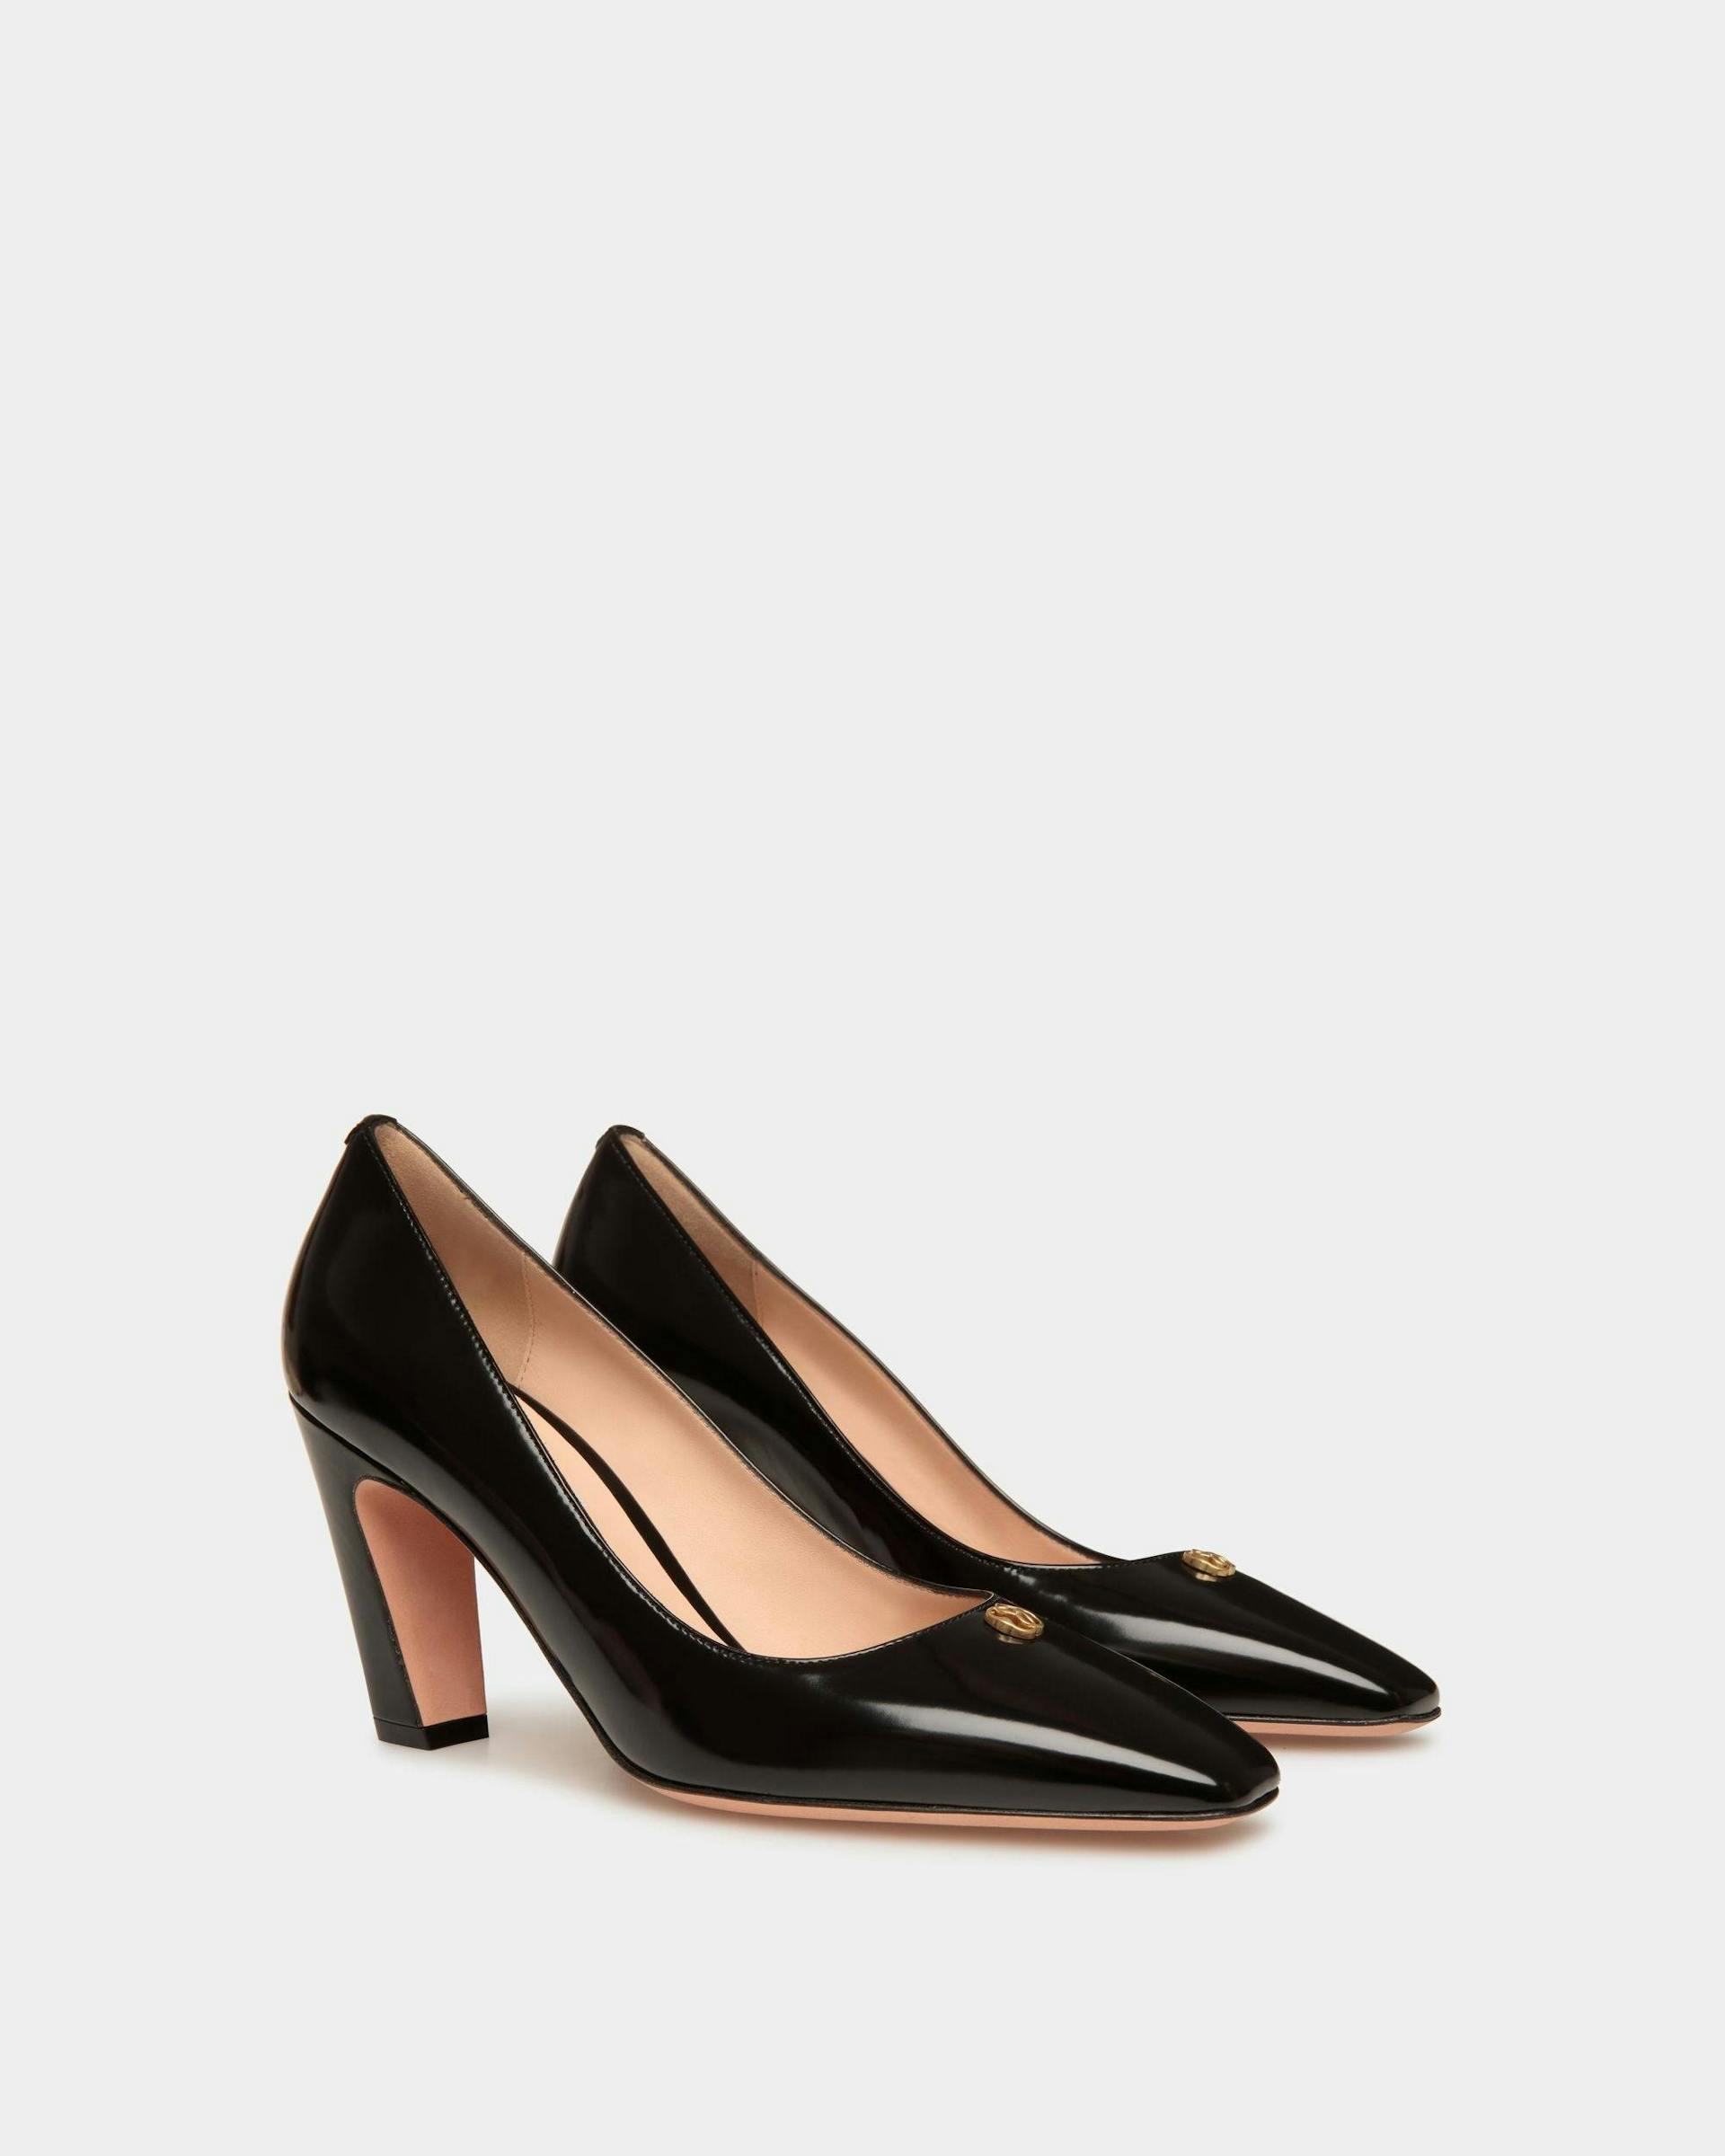 Women's Sylt Pump In Black Leather | Bally | Still Life 3/4 Front